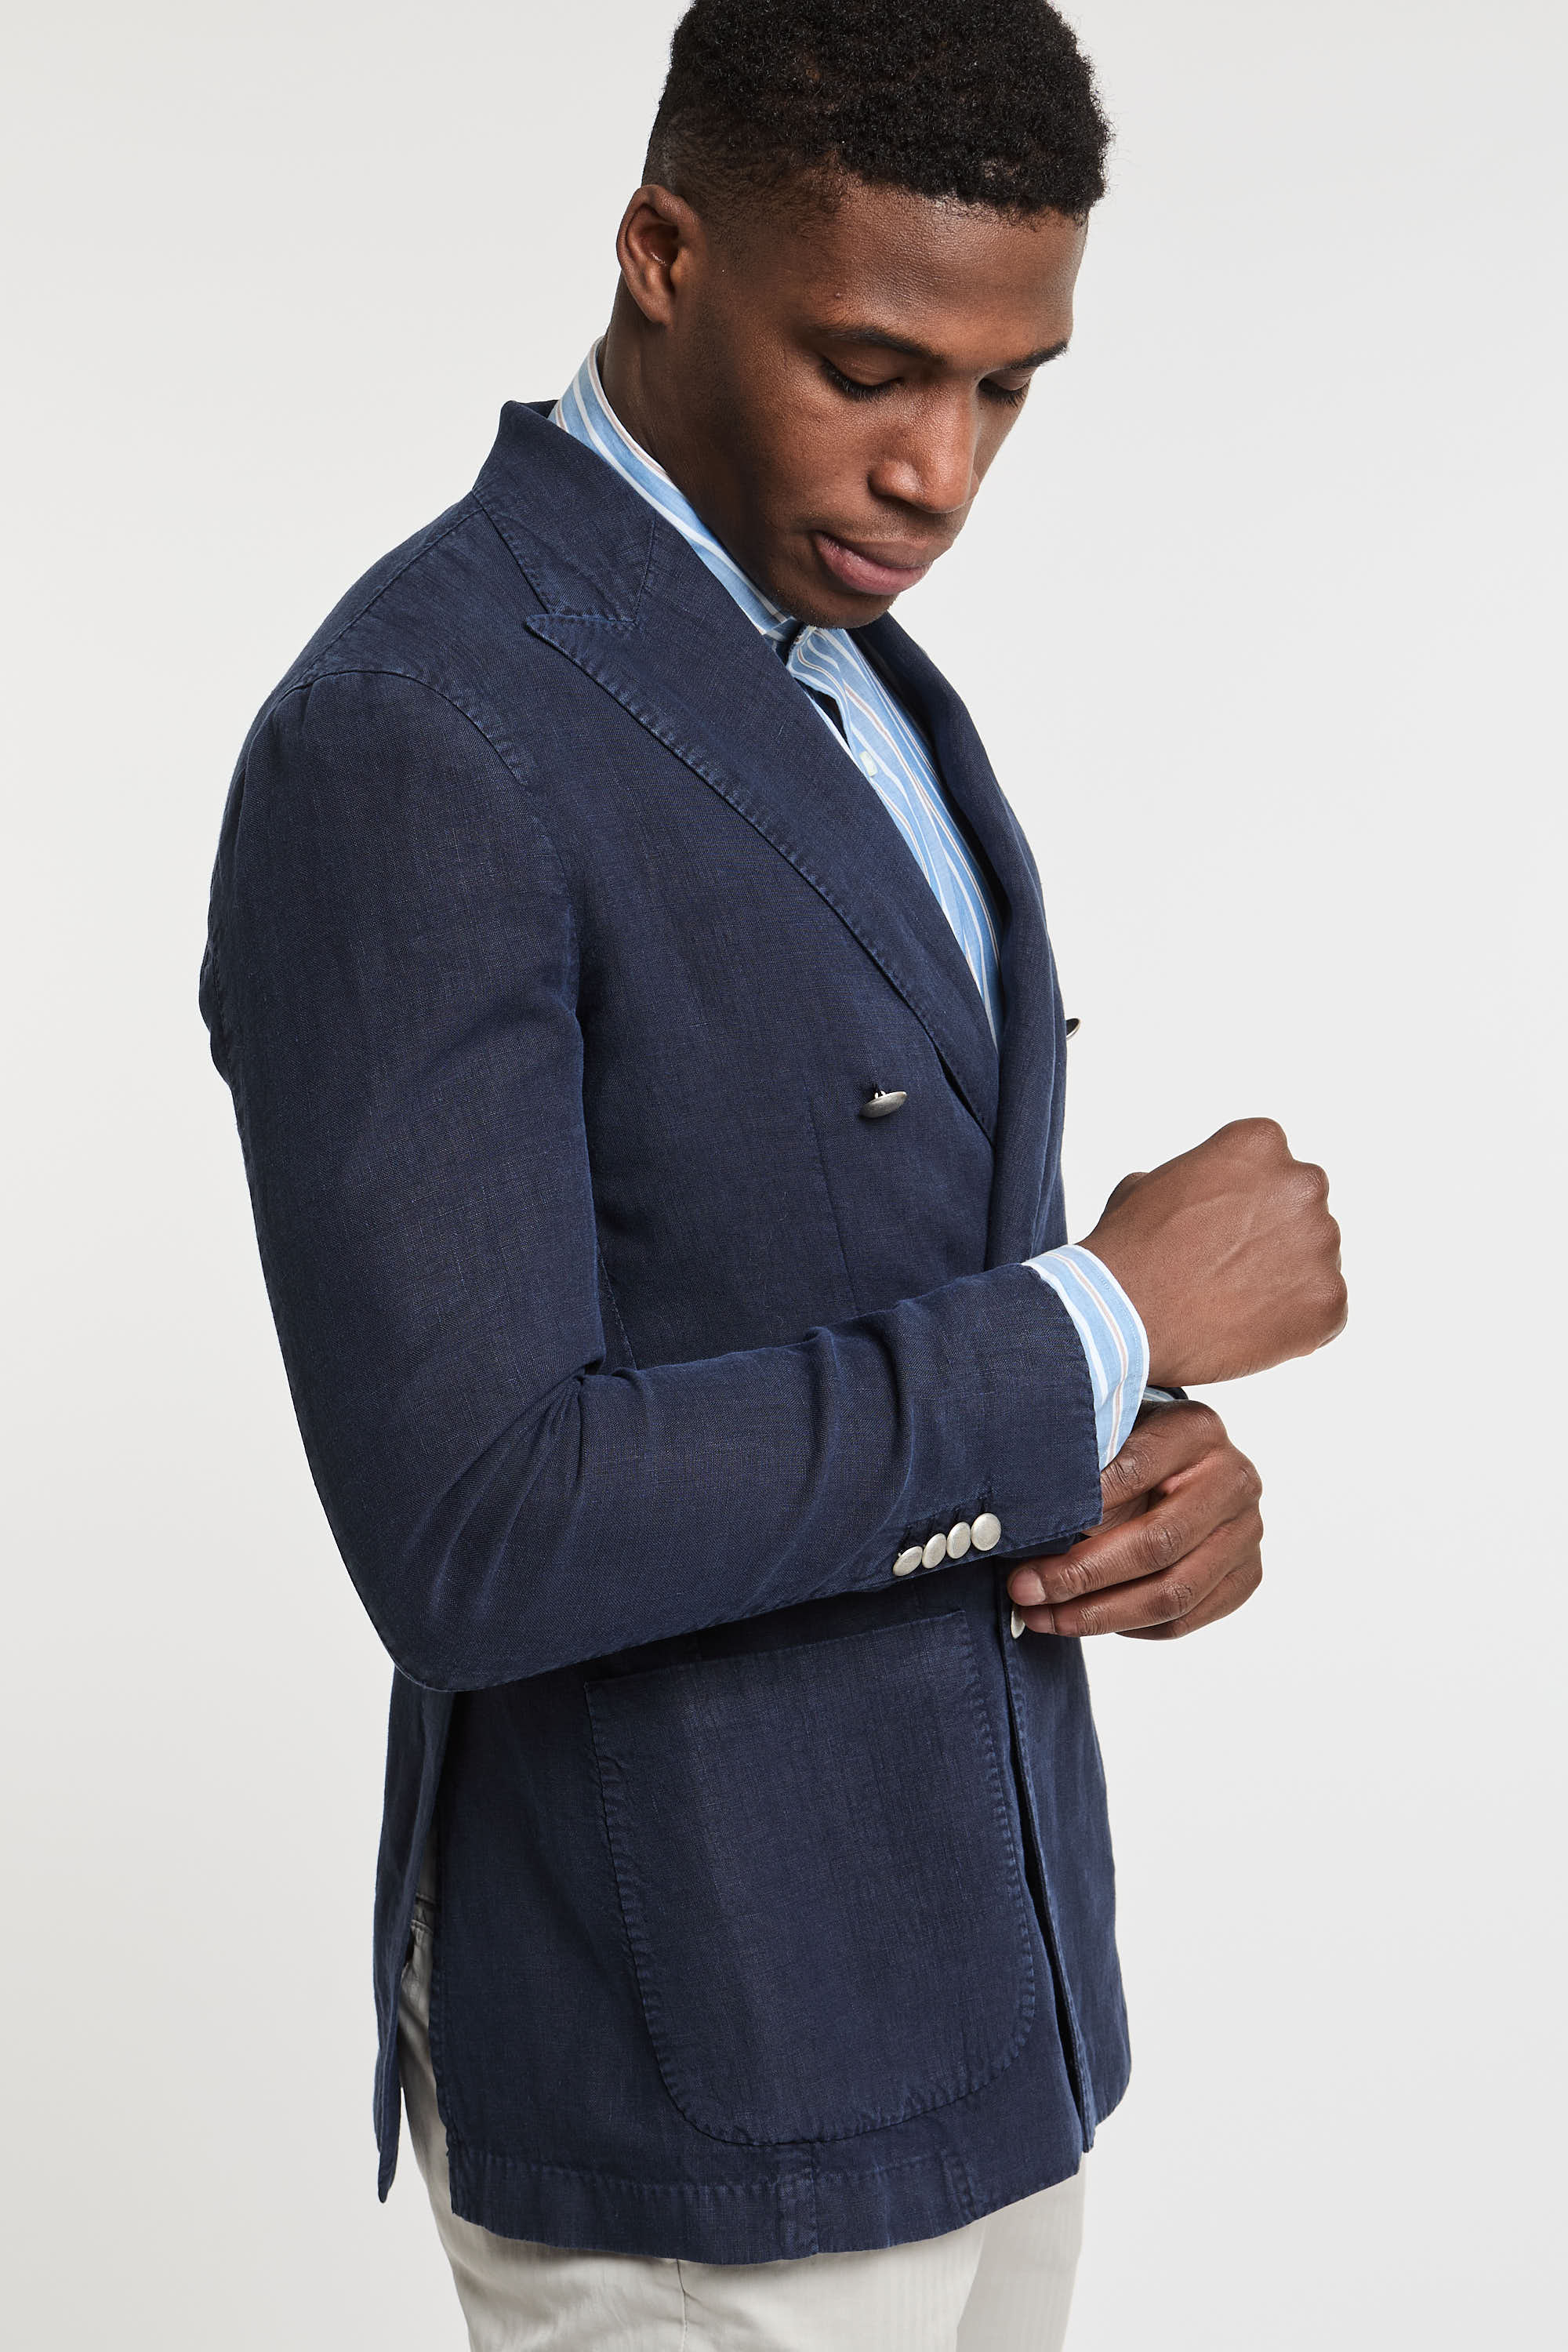 L.B.M. 1911 Double-Breasted Linen Blue Jacket-7